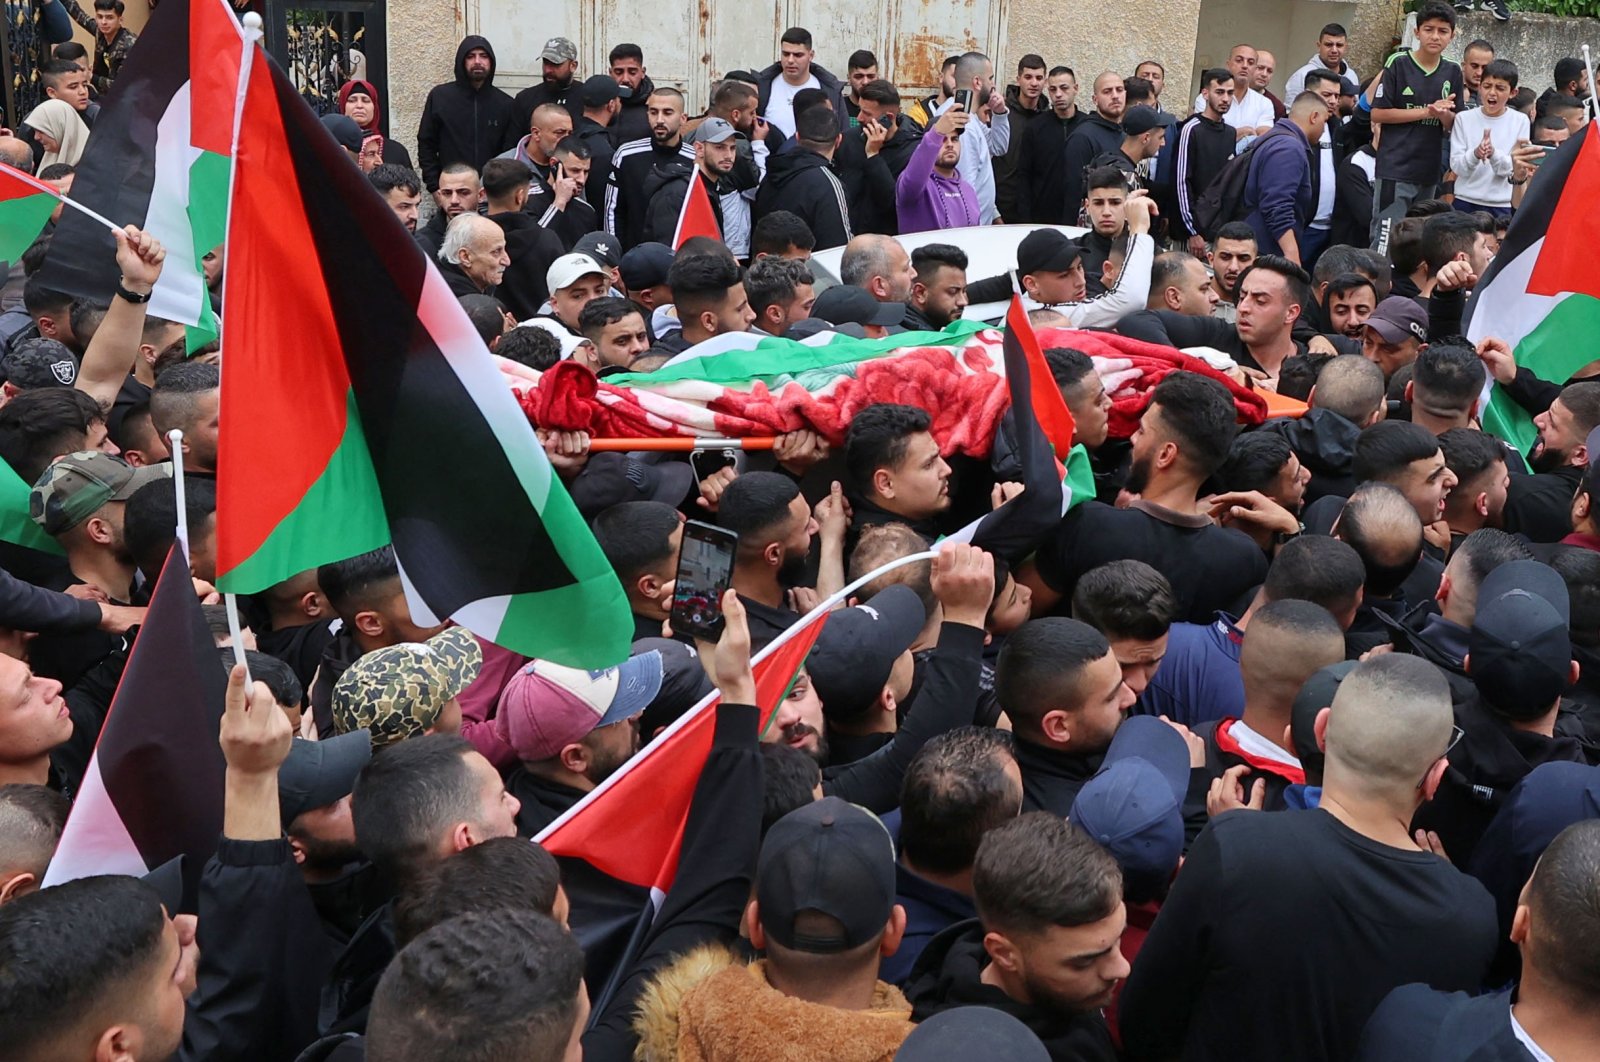 Palestinian mourners carry the body of Amir Imad Abu Khadija, who was killed in an Israeli raid in Tulkarm, occupied West Bank, Palestine, March 23, 2023. (AFP Photo)